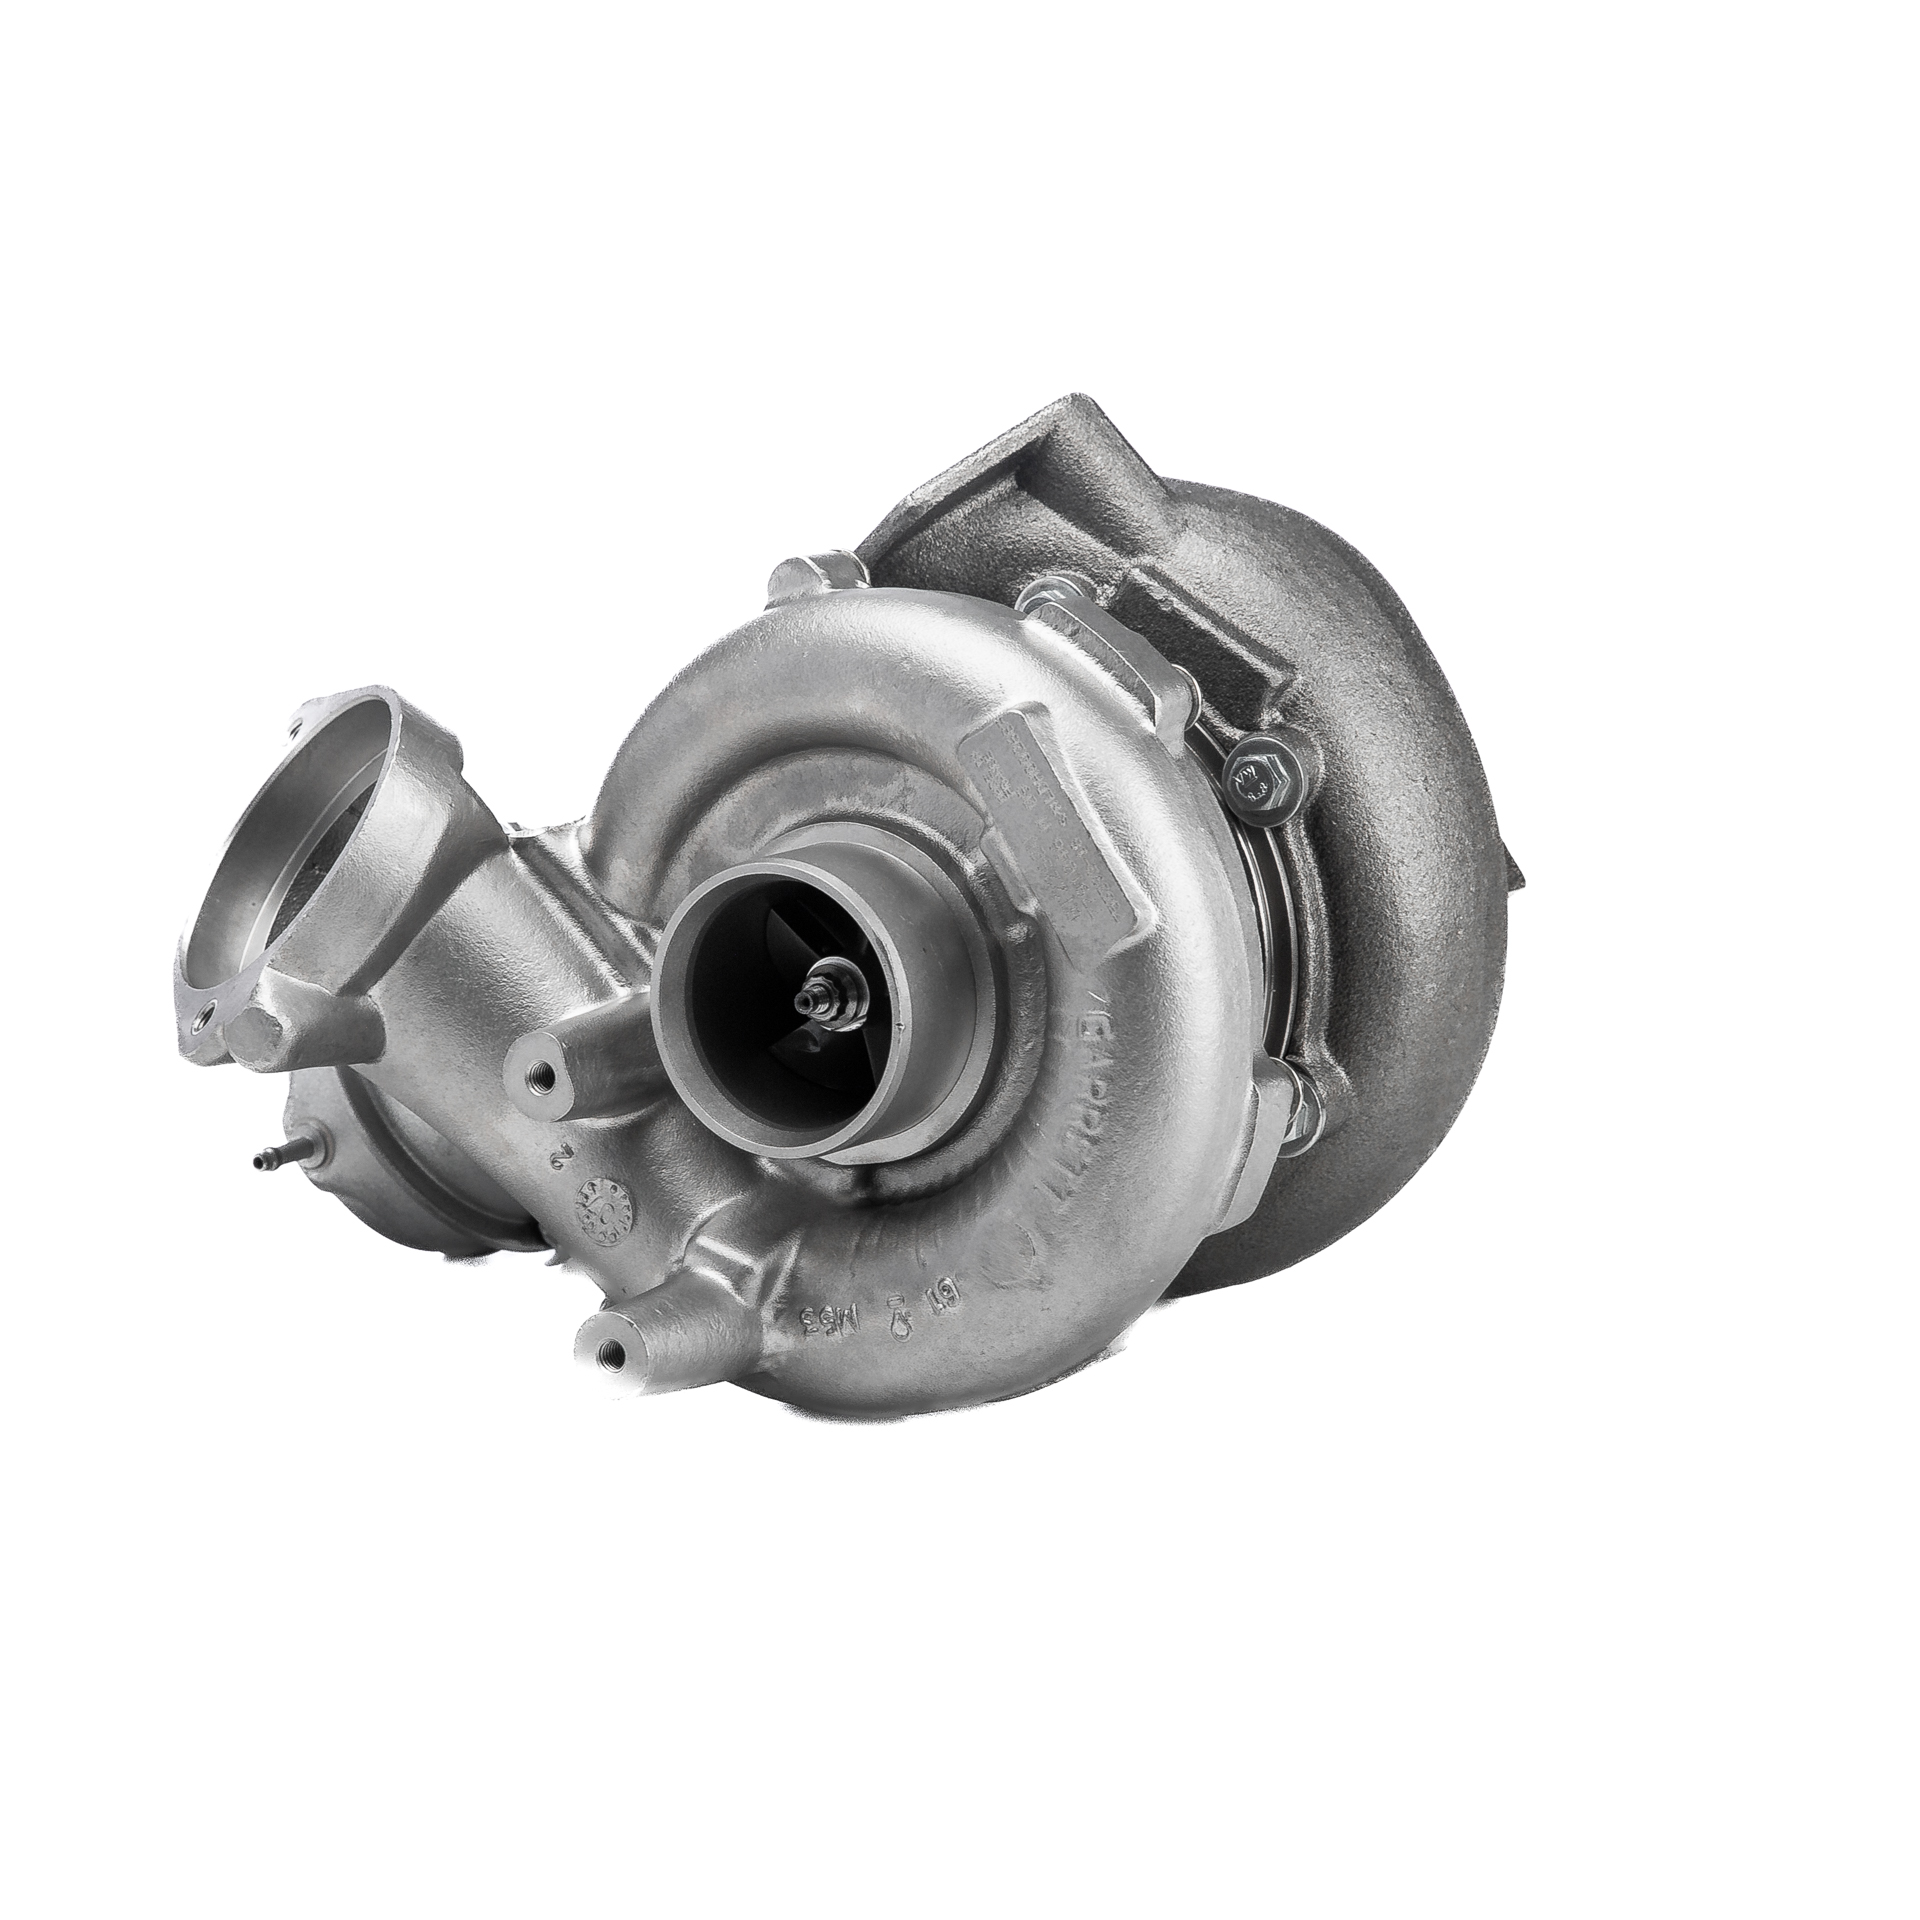 BR Turbo 753392-5001RS Turbocharger 11 65 7 791 044 F